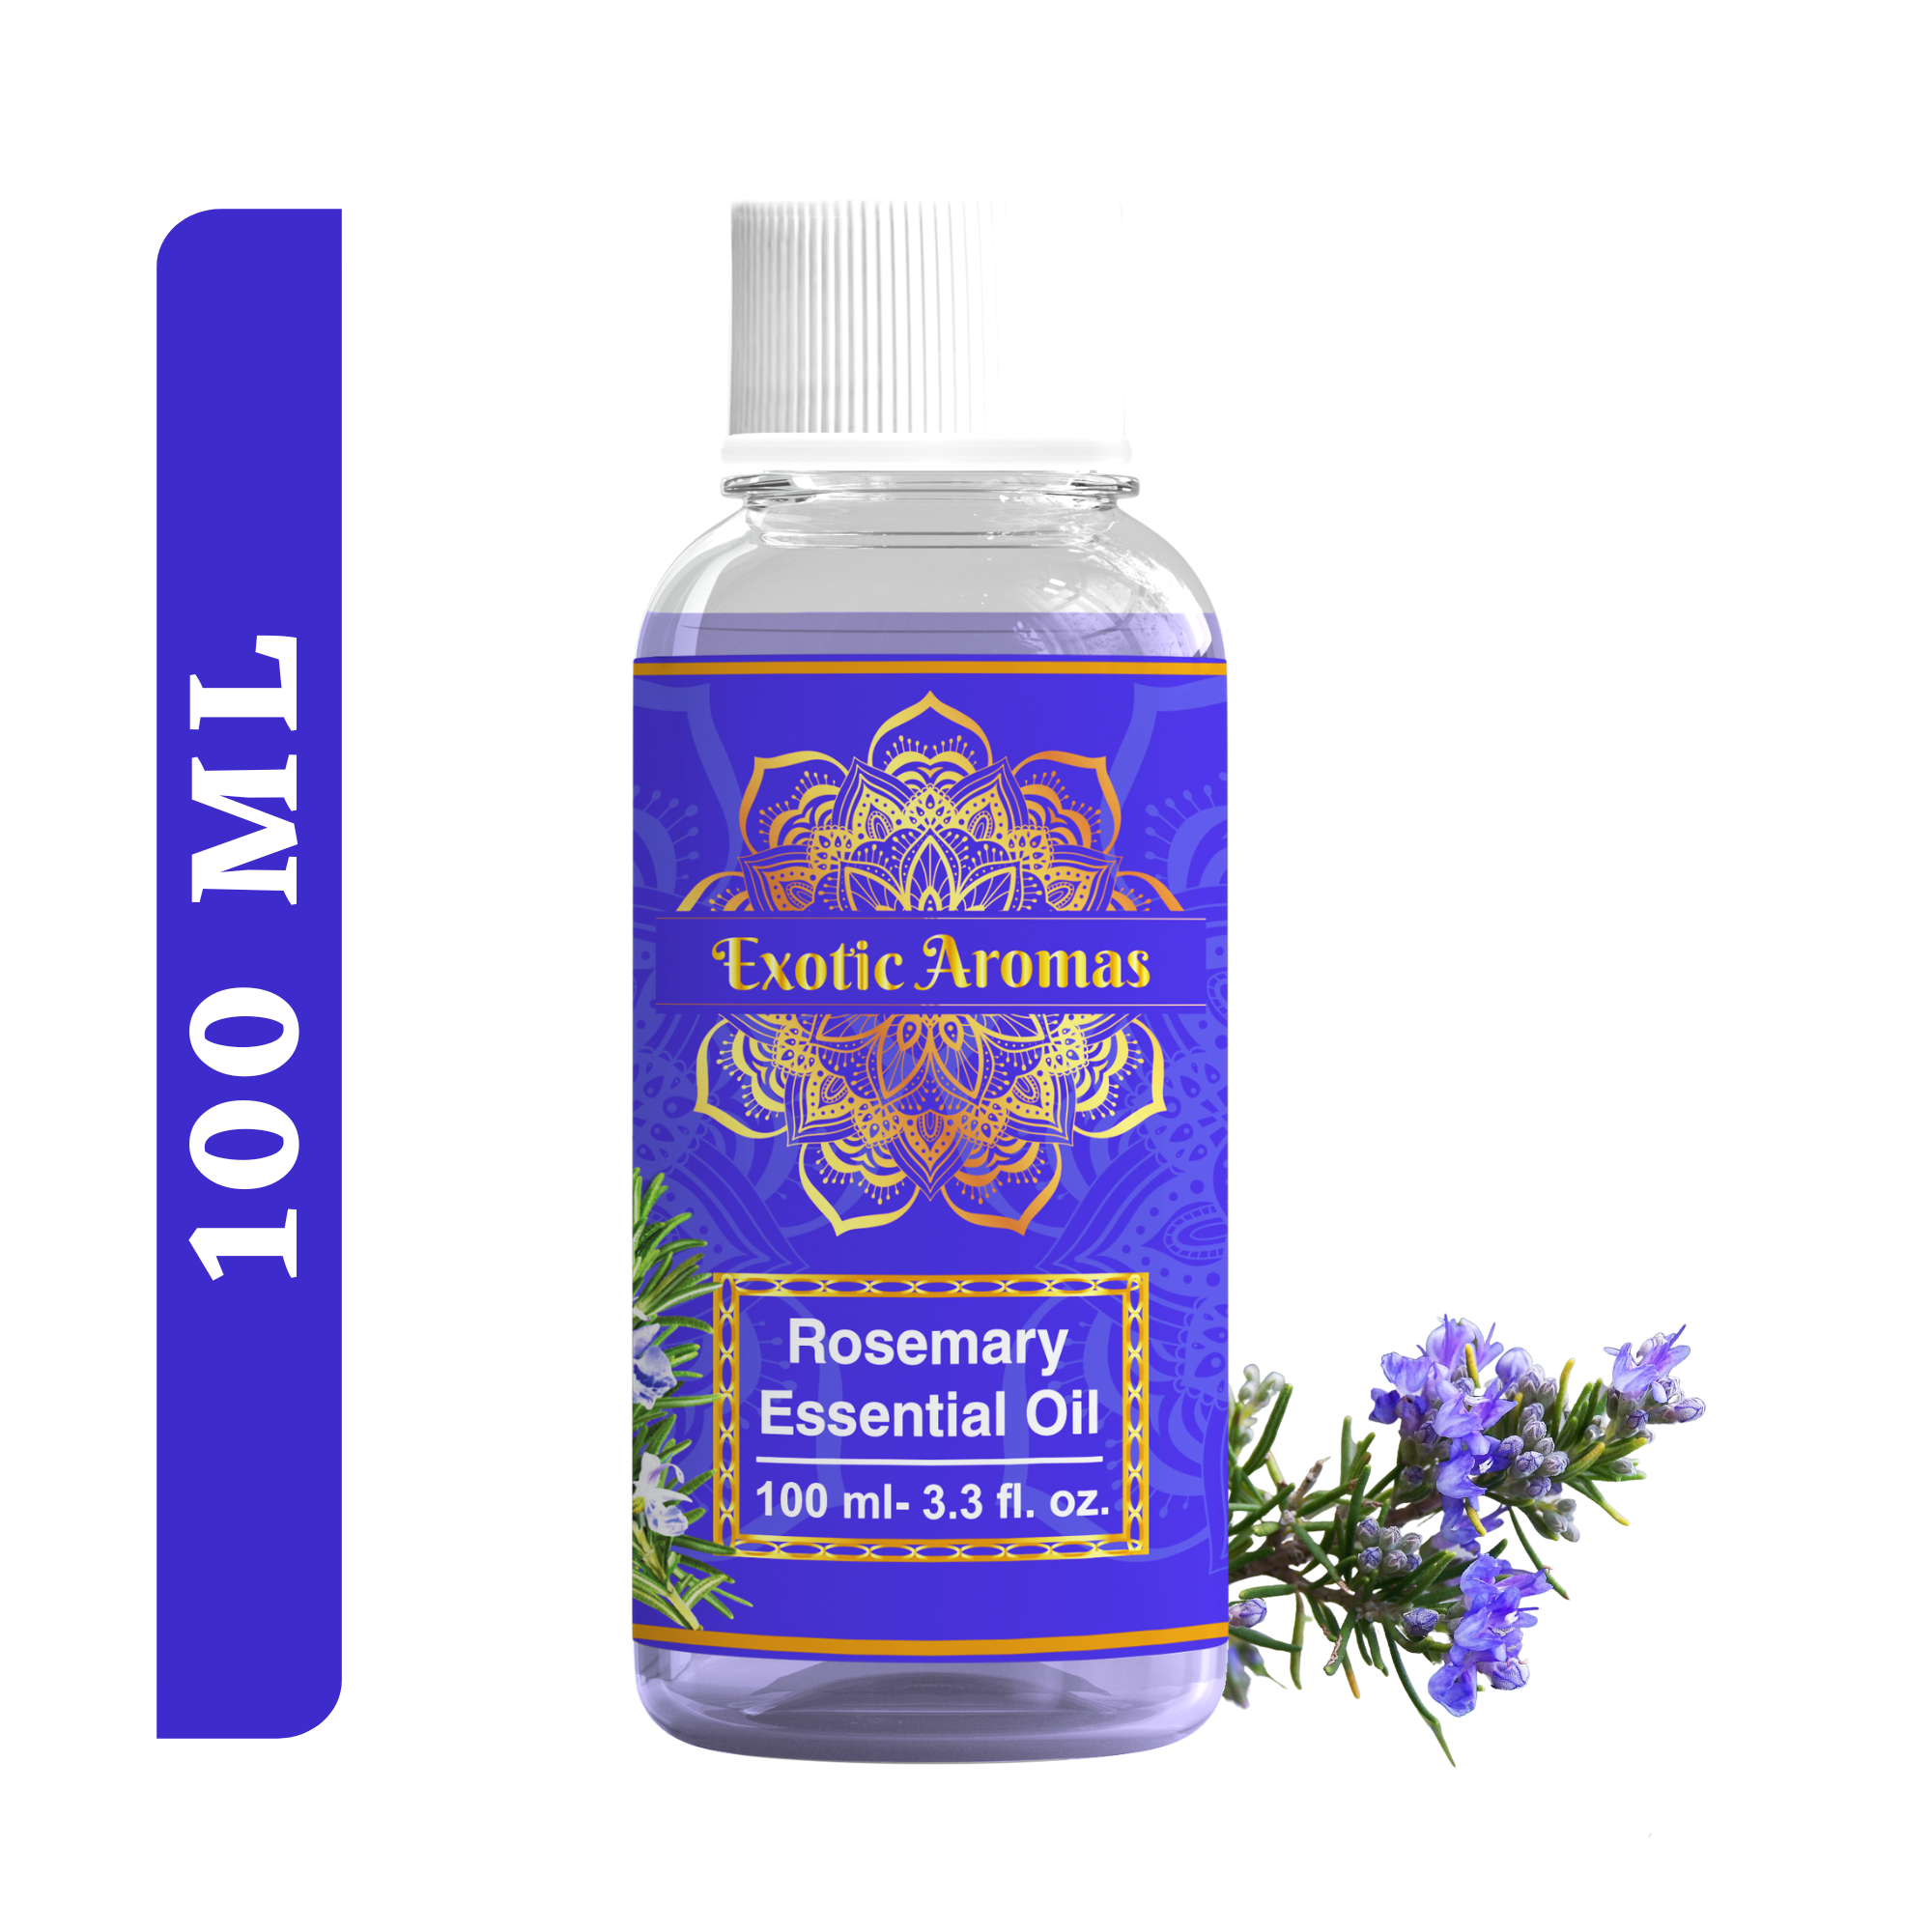 Exotic 100% Pure Natural Aroma Oil Organic Aromatherapy Essential Oils Scented  Oils for Candle Making, Soap Scents, Aroma Beads, Bath Bombs, Perfume &  Flavoring Oil for Lip Gloss, 15ml 